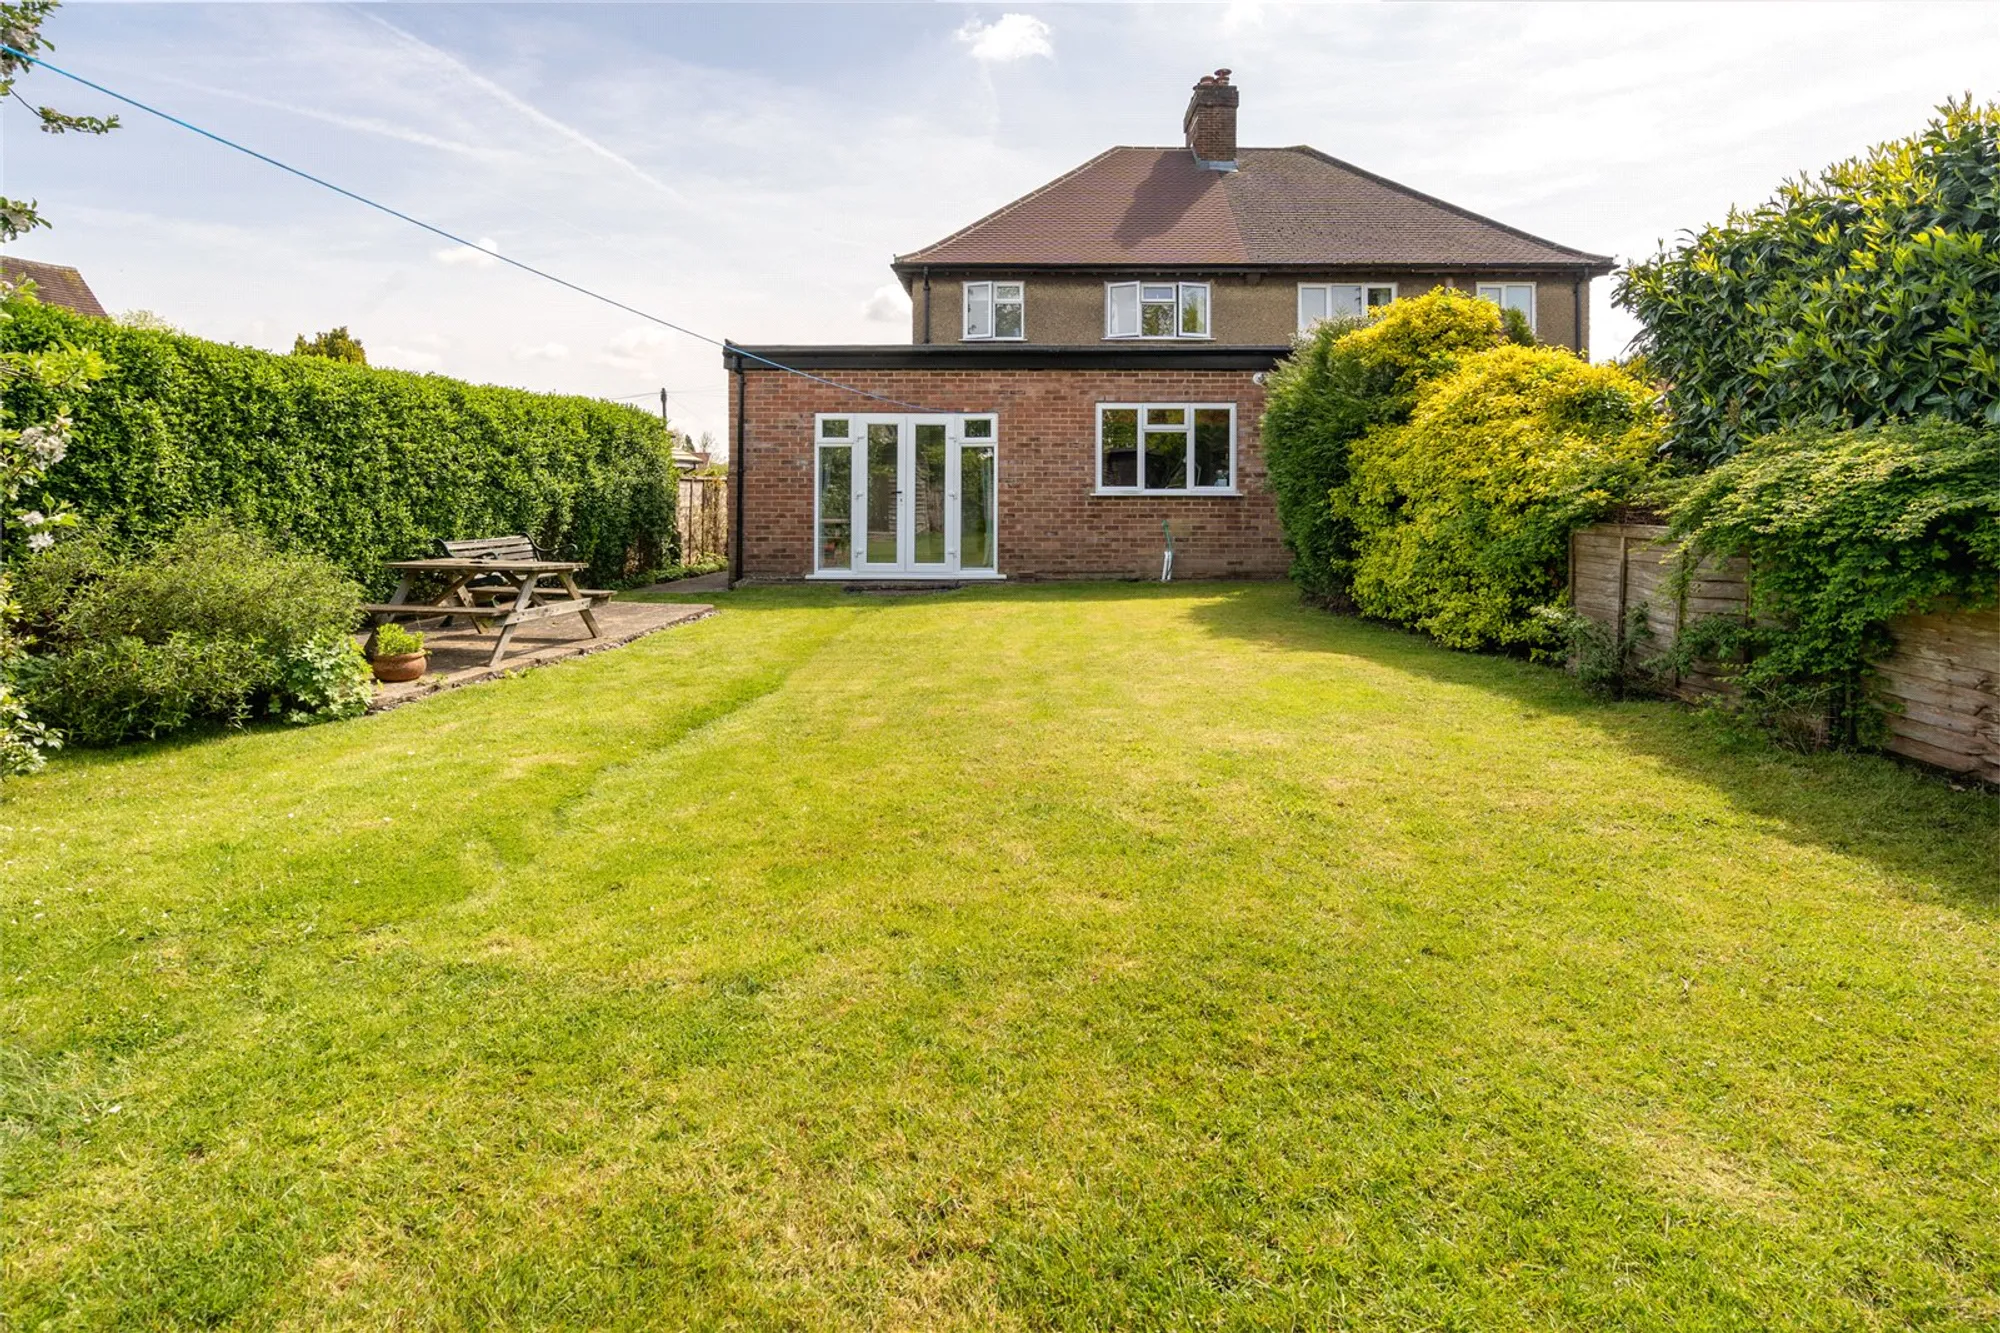 4 bed semi-detached house for sale in Slines Oak Road, Caterham  - Property Image 3